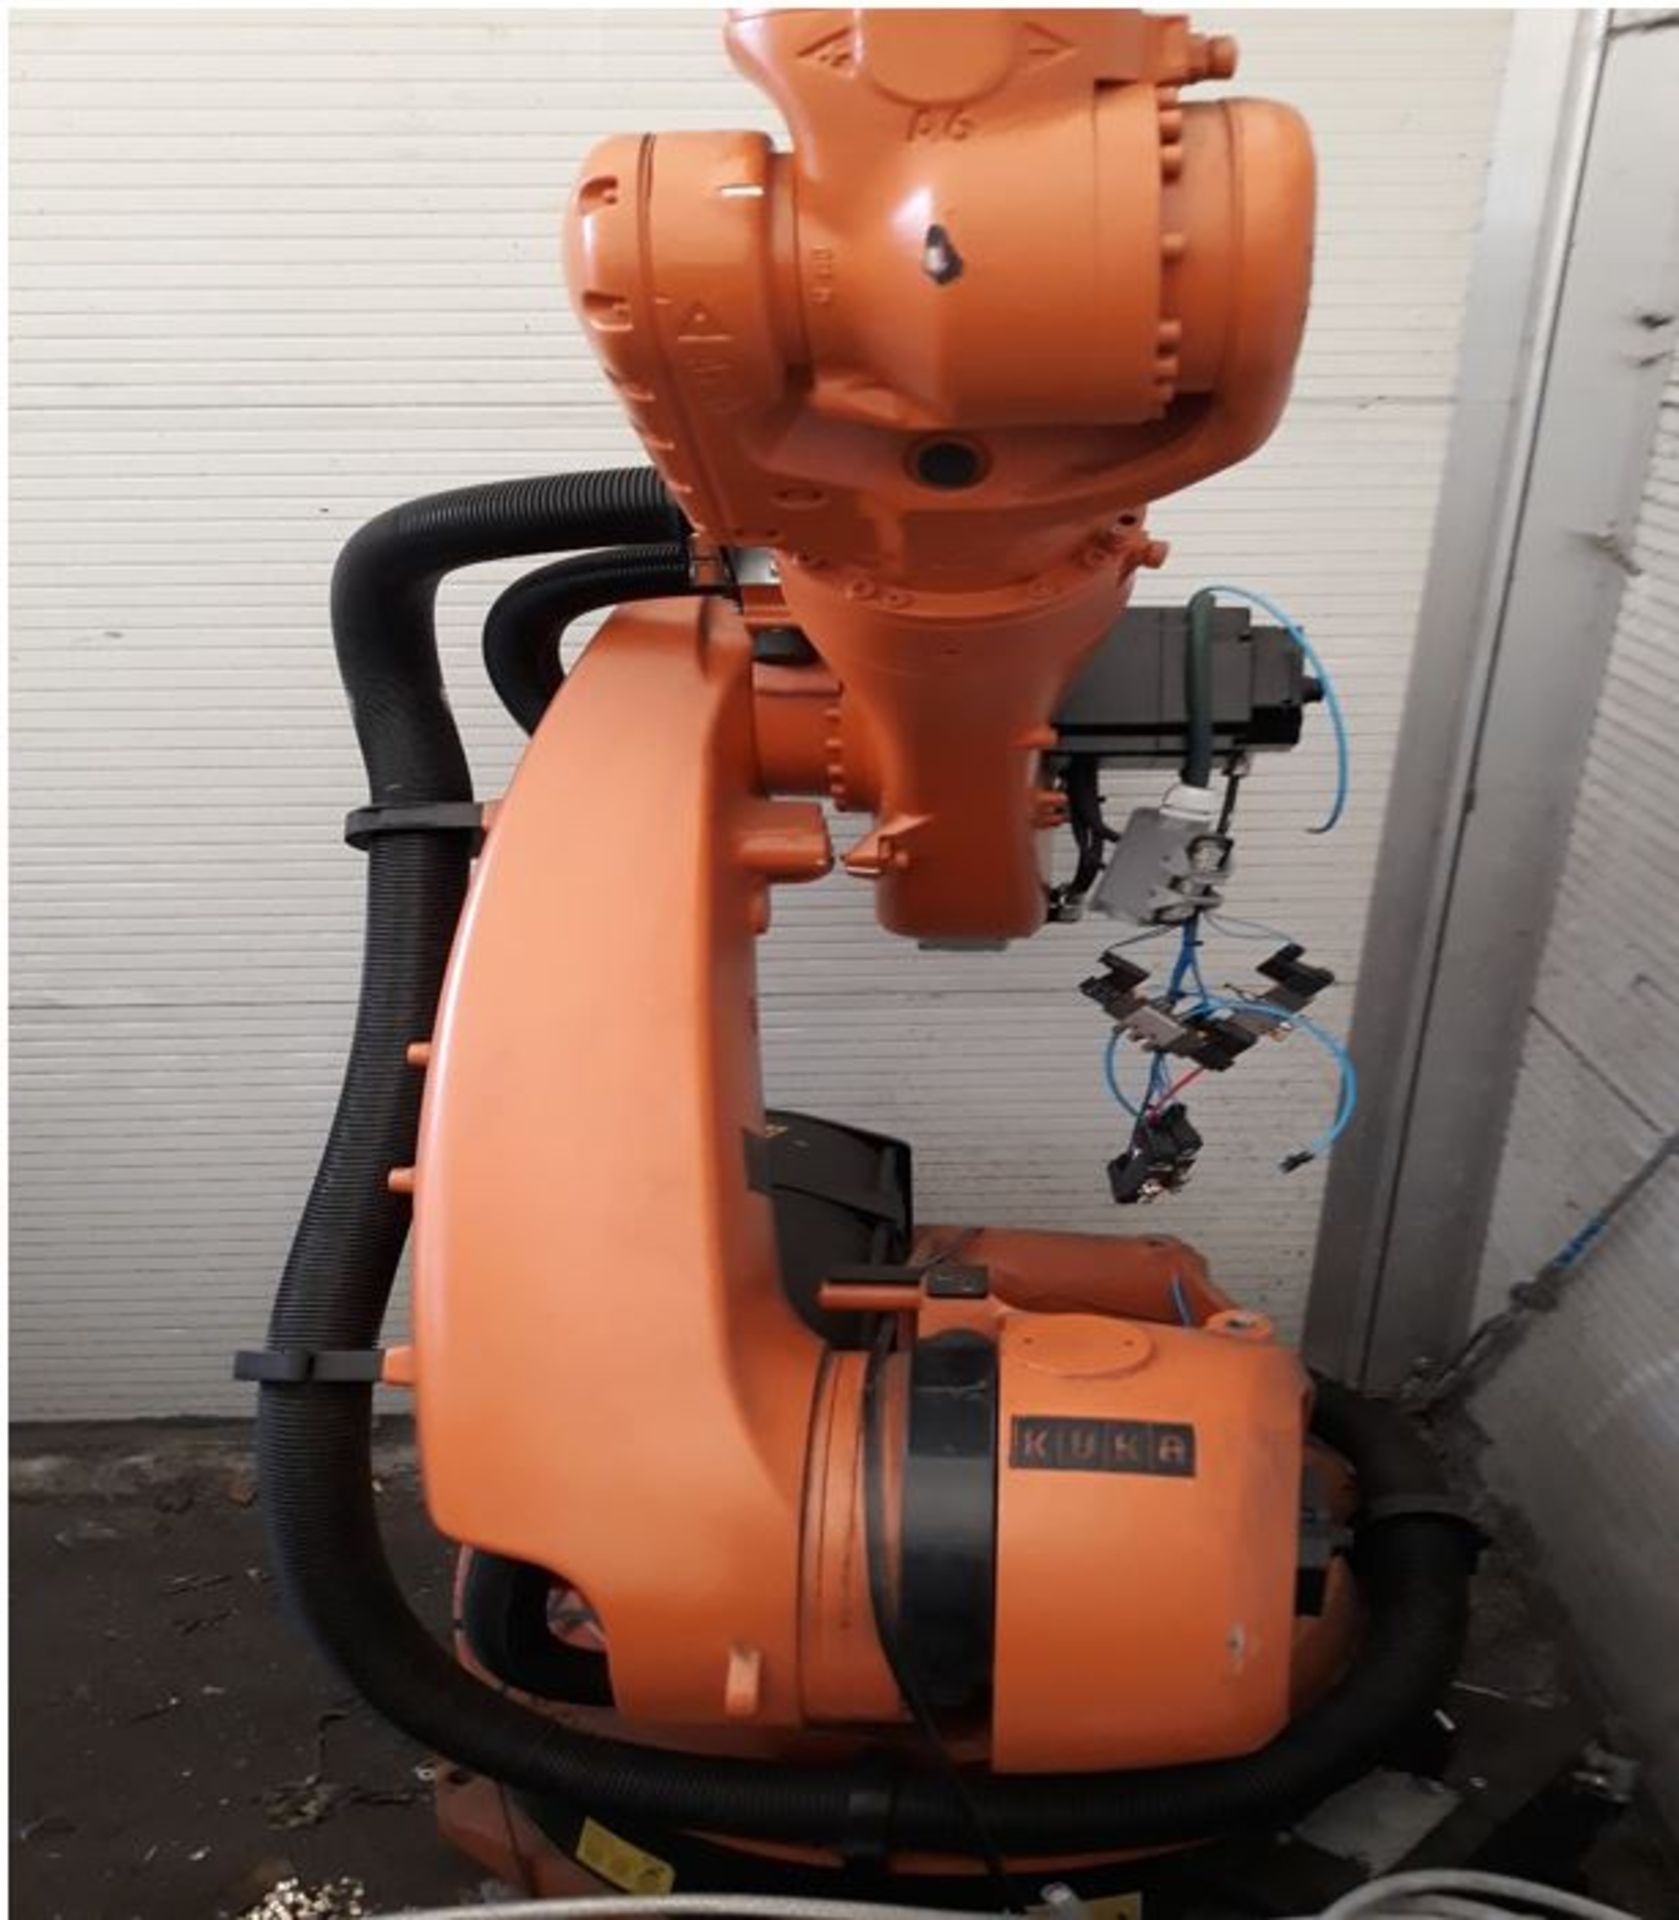 A Kuka Industrial Robot - Image 2 of 3